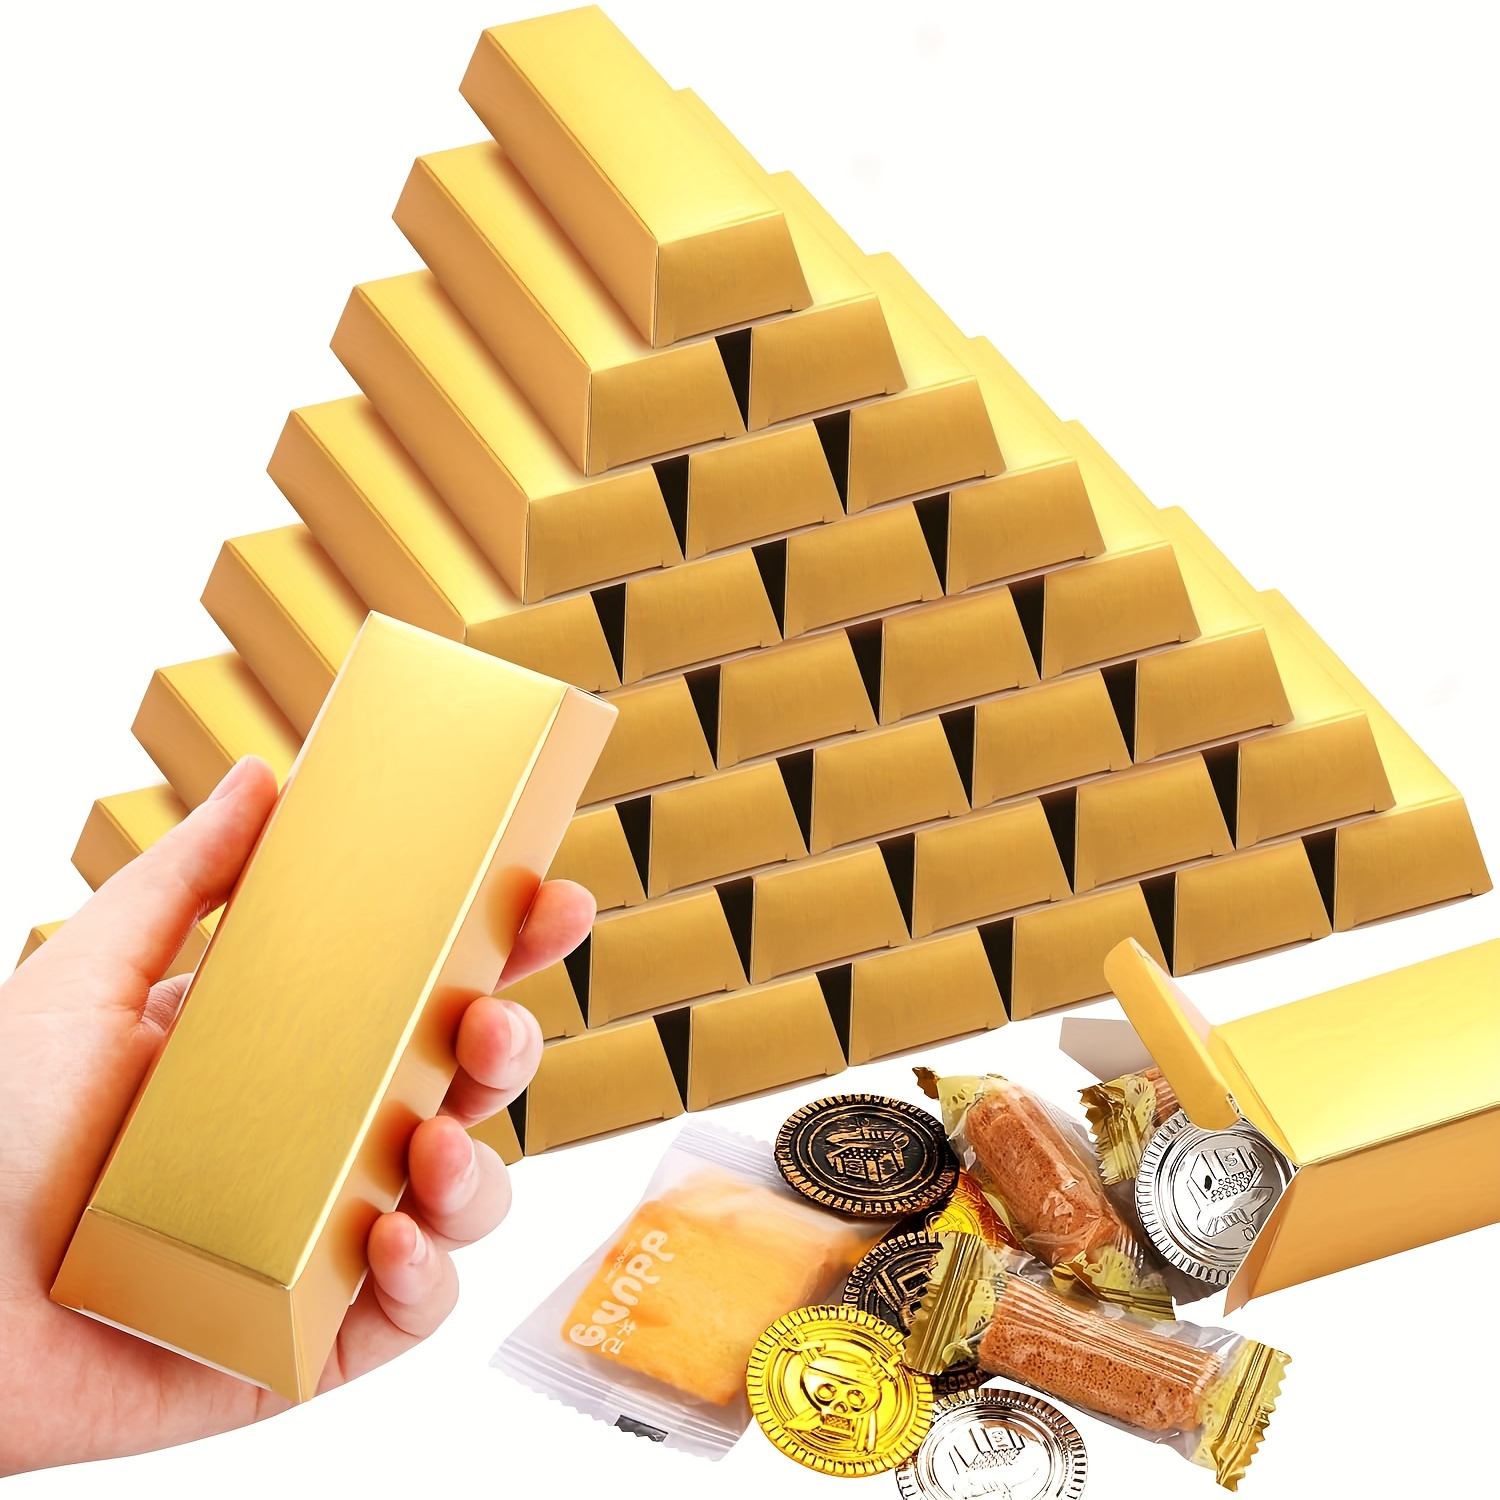 

10pcs Golden Bars Fake Golden Bar Gift Box Golden Foil Treasure Brick Paper Box Golden Party Favor Boxes Pirate Theme Party Supplies For Graduation Party Birthday Candy Treats Crafts Decorations